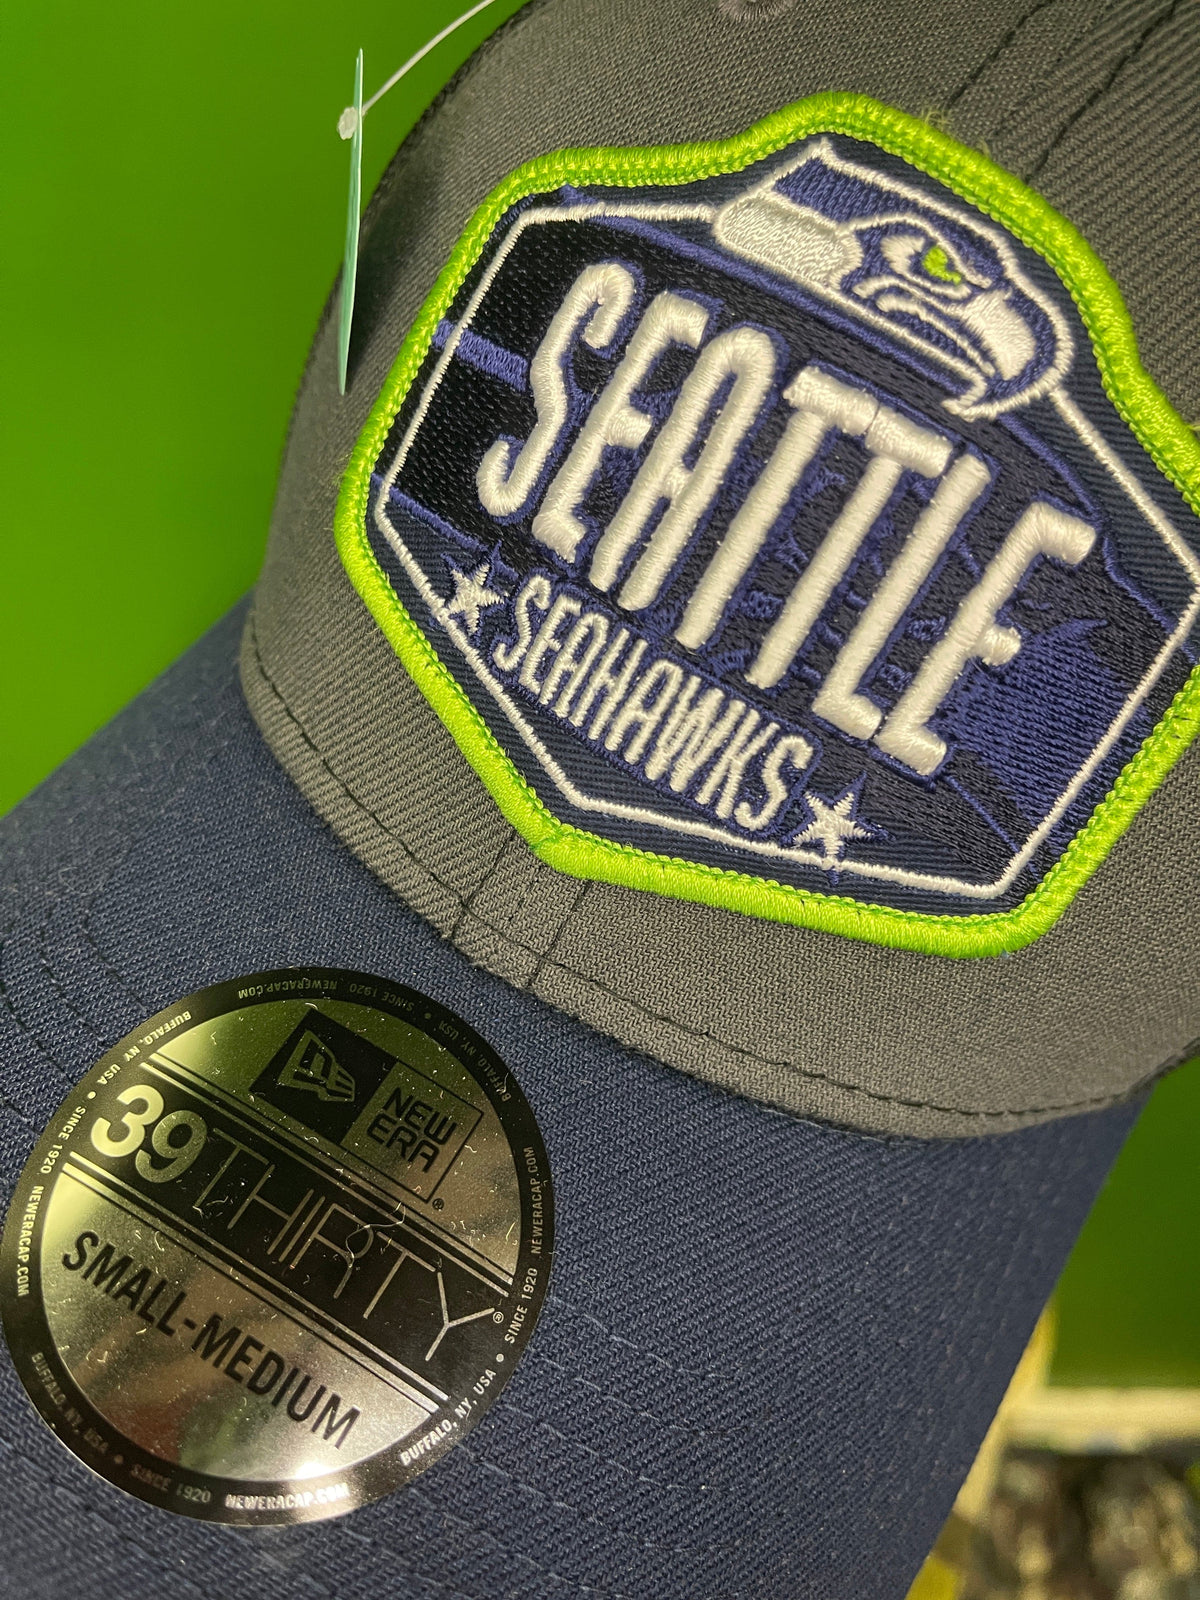 NFL Seattle Seahawks New Era 39THIRTY Fitted Hat/Cap Small/Medium NWT